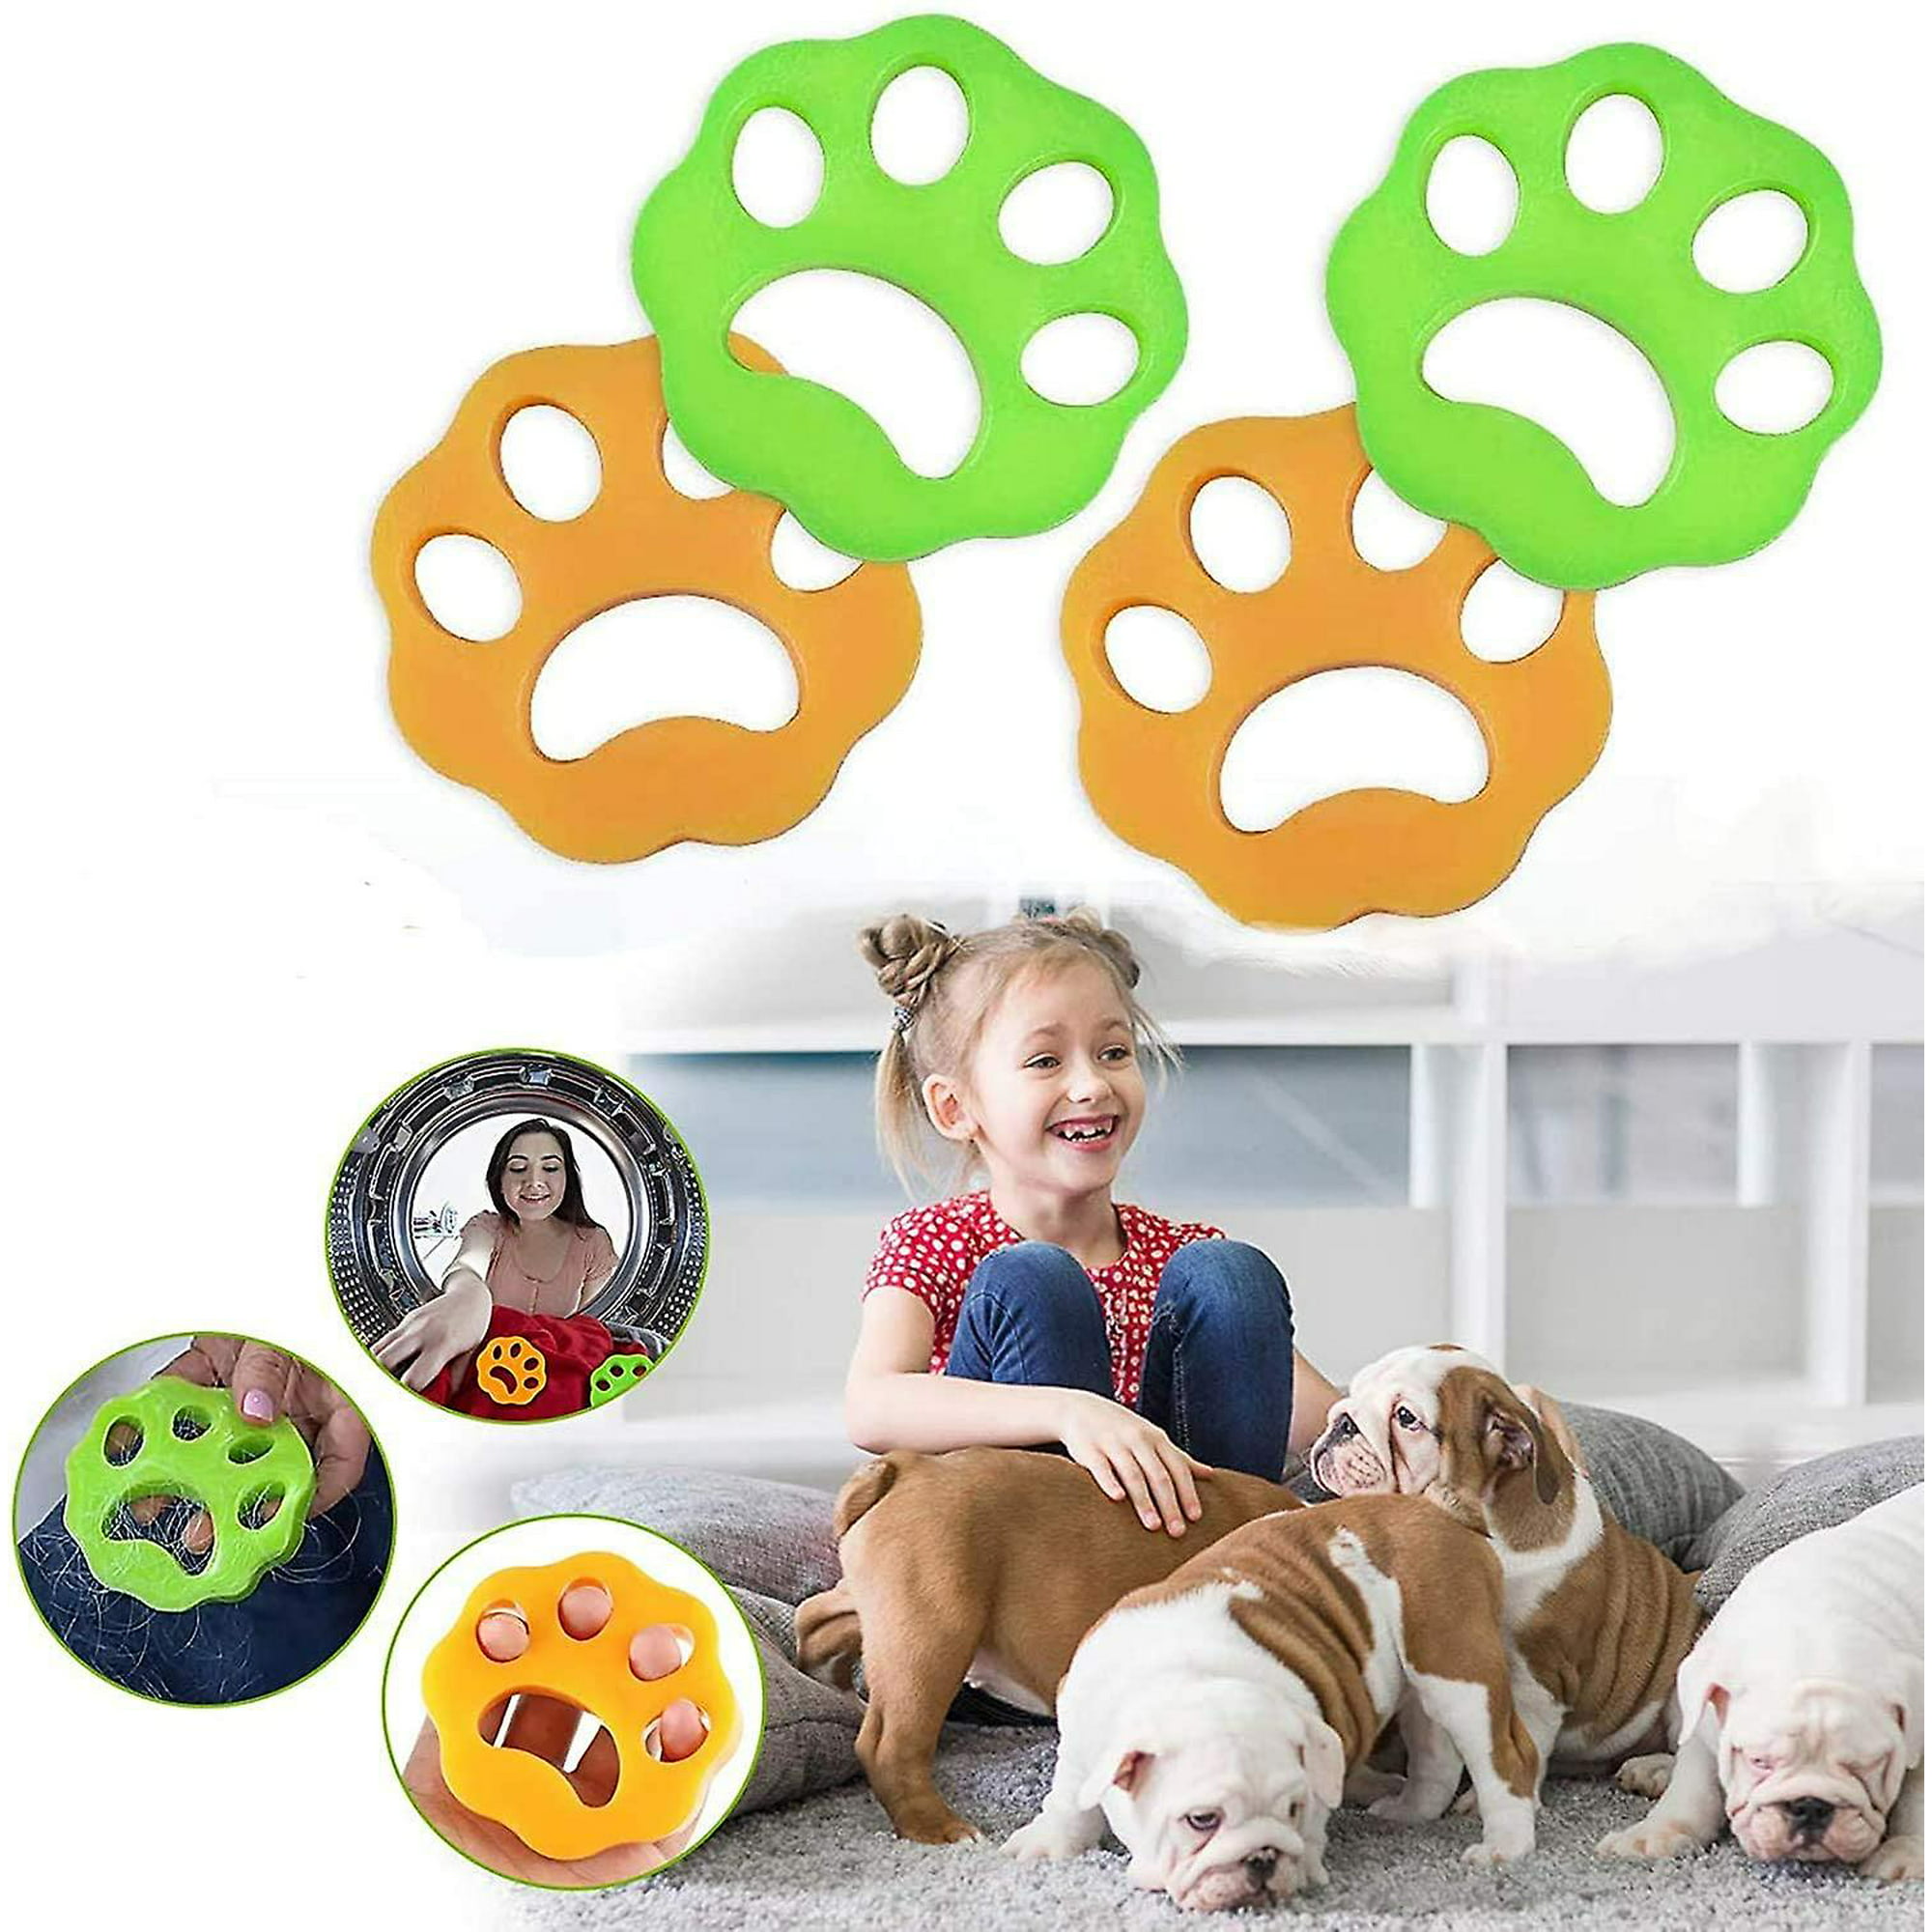 HEIBIN 4 Pack Hair Removal Balls, Pet Hair Cleaning Tools, Washing Machine  Dust and Debris to Capture Pet Hair Stuck on Clothes. | Walmart Canada